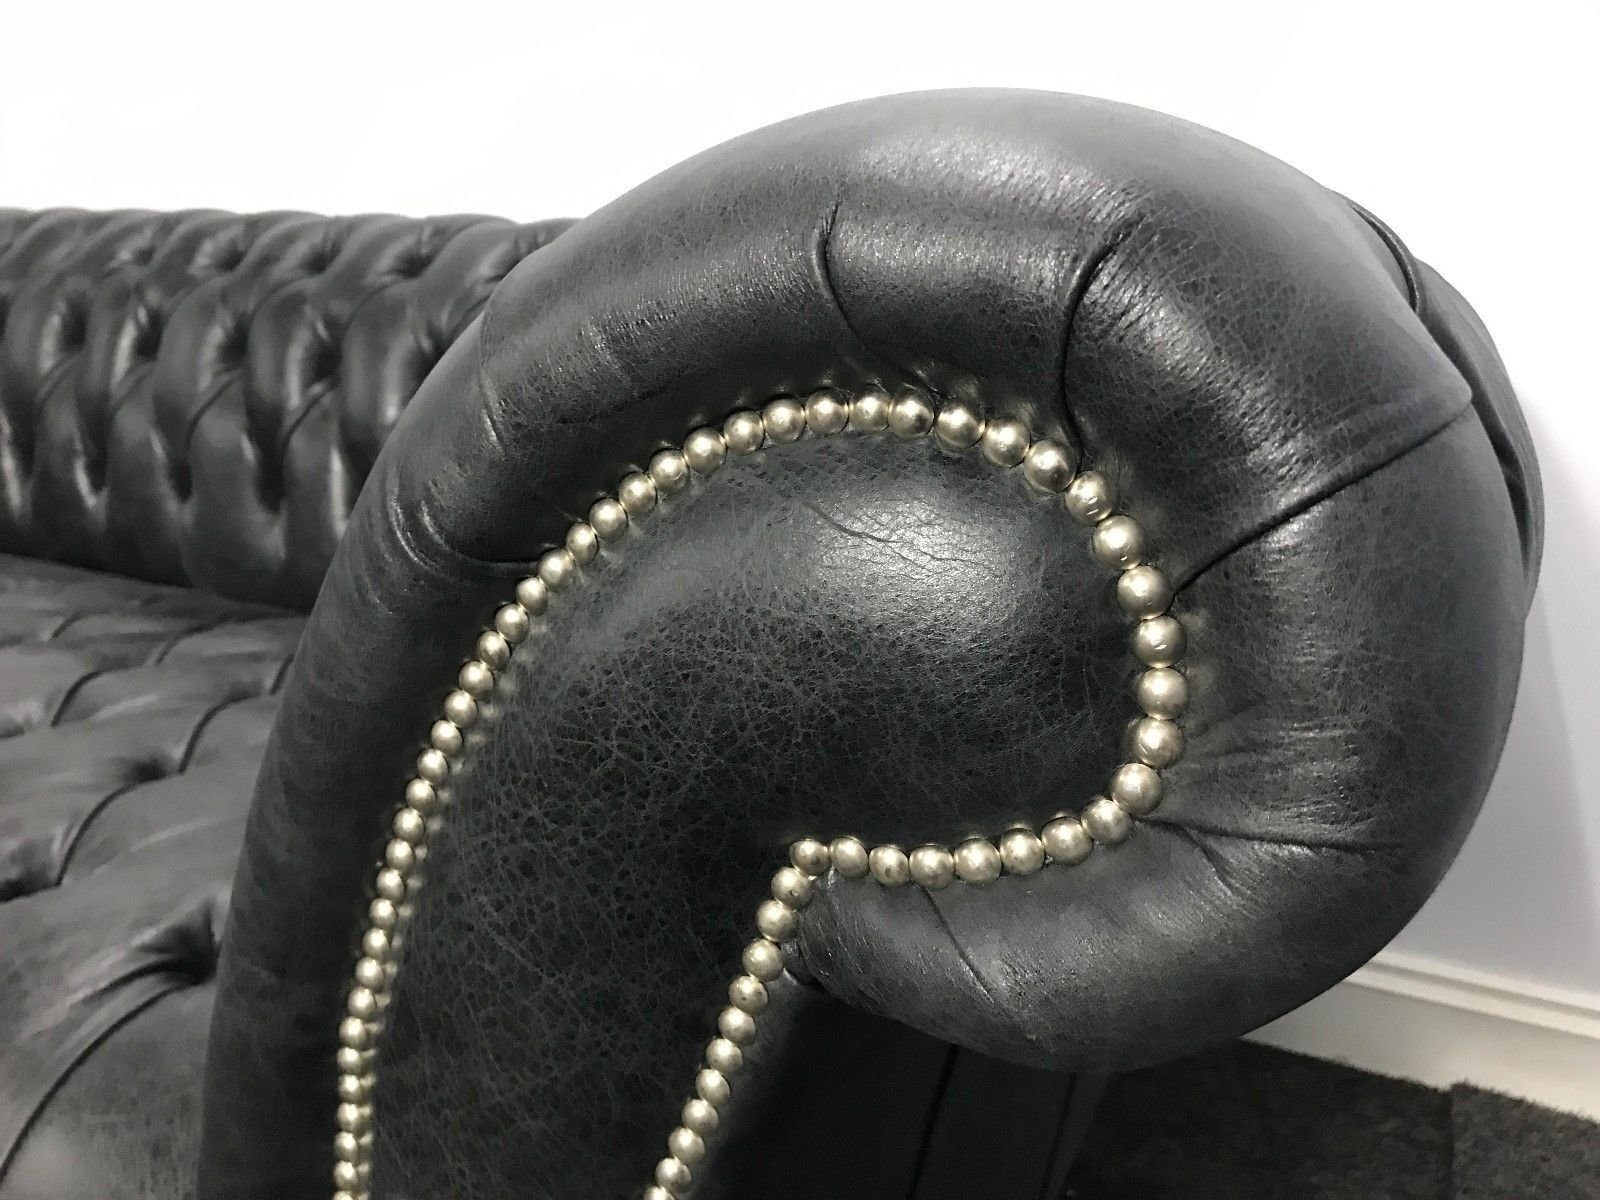 JVmoebel in 1 100% Couch Chesterfield-Sofa Teile, Original Made Chesterfield Sofa Sofort, Leder Europa Luxus Vintage Sitz